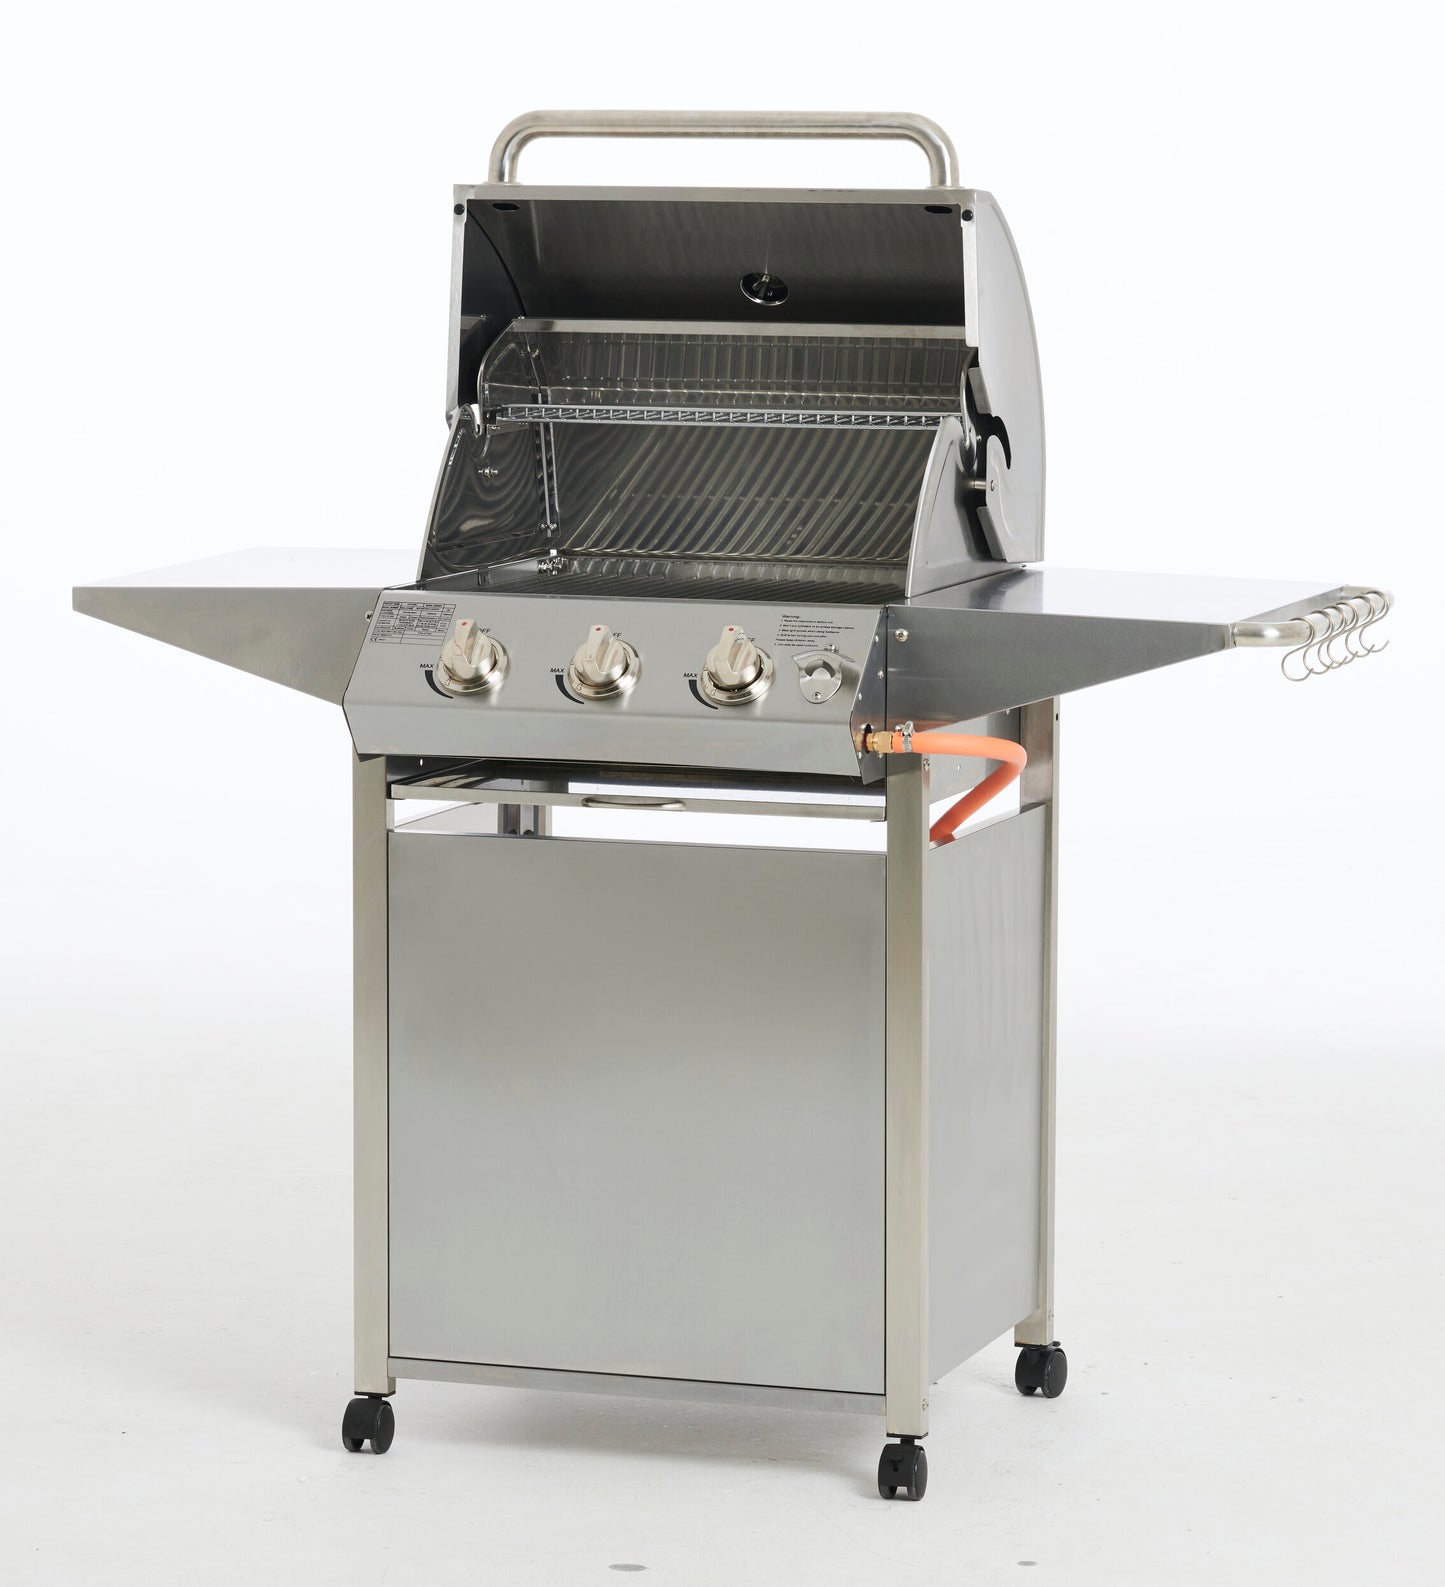 Papa's Grill, 3 Burner Stainless steel grill